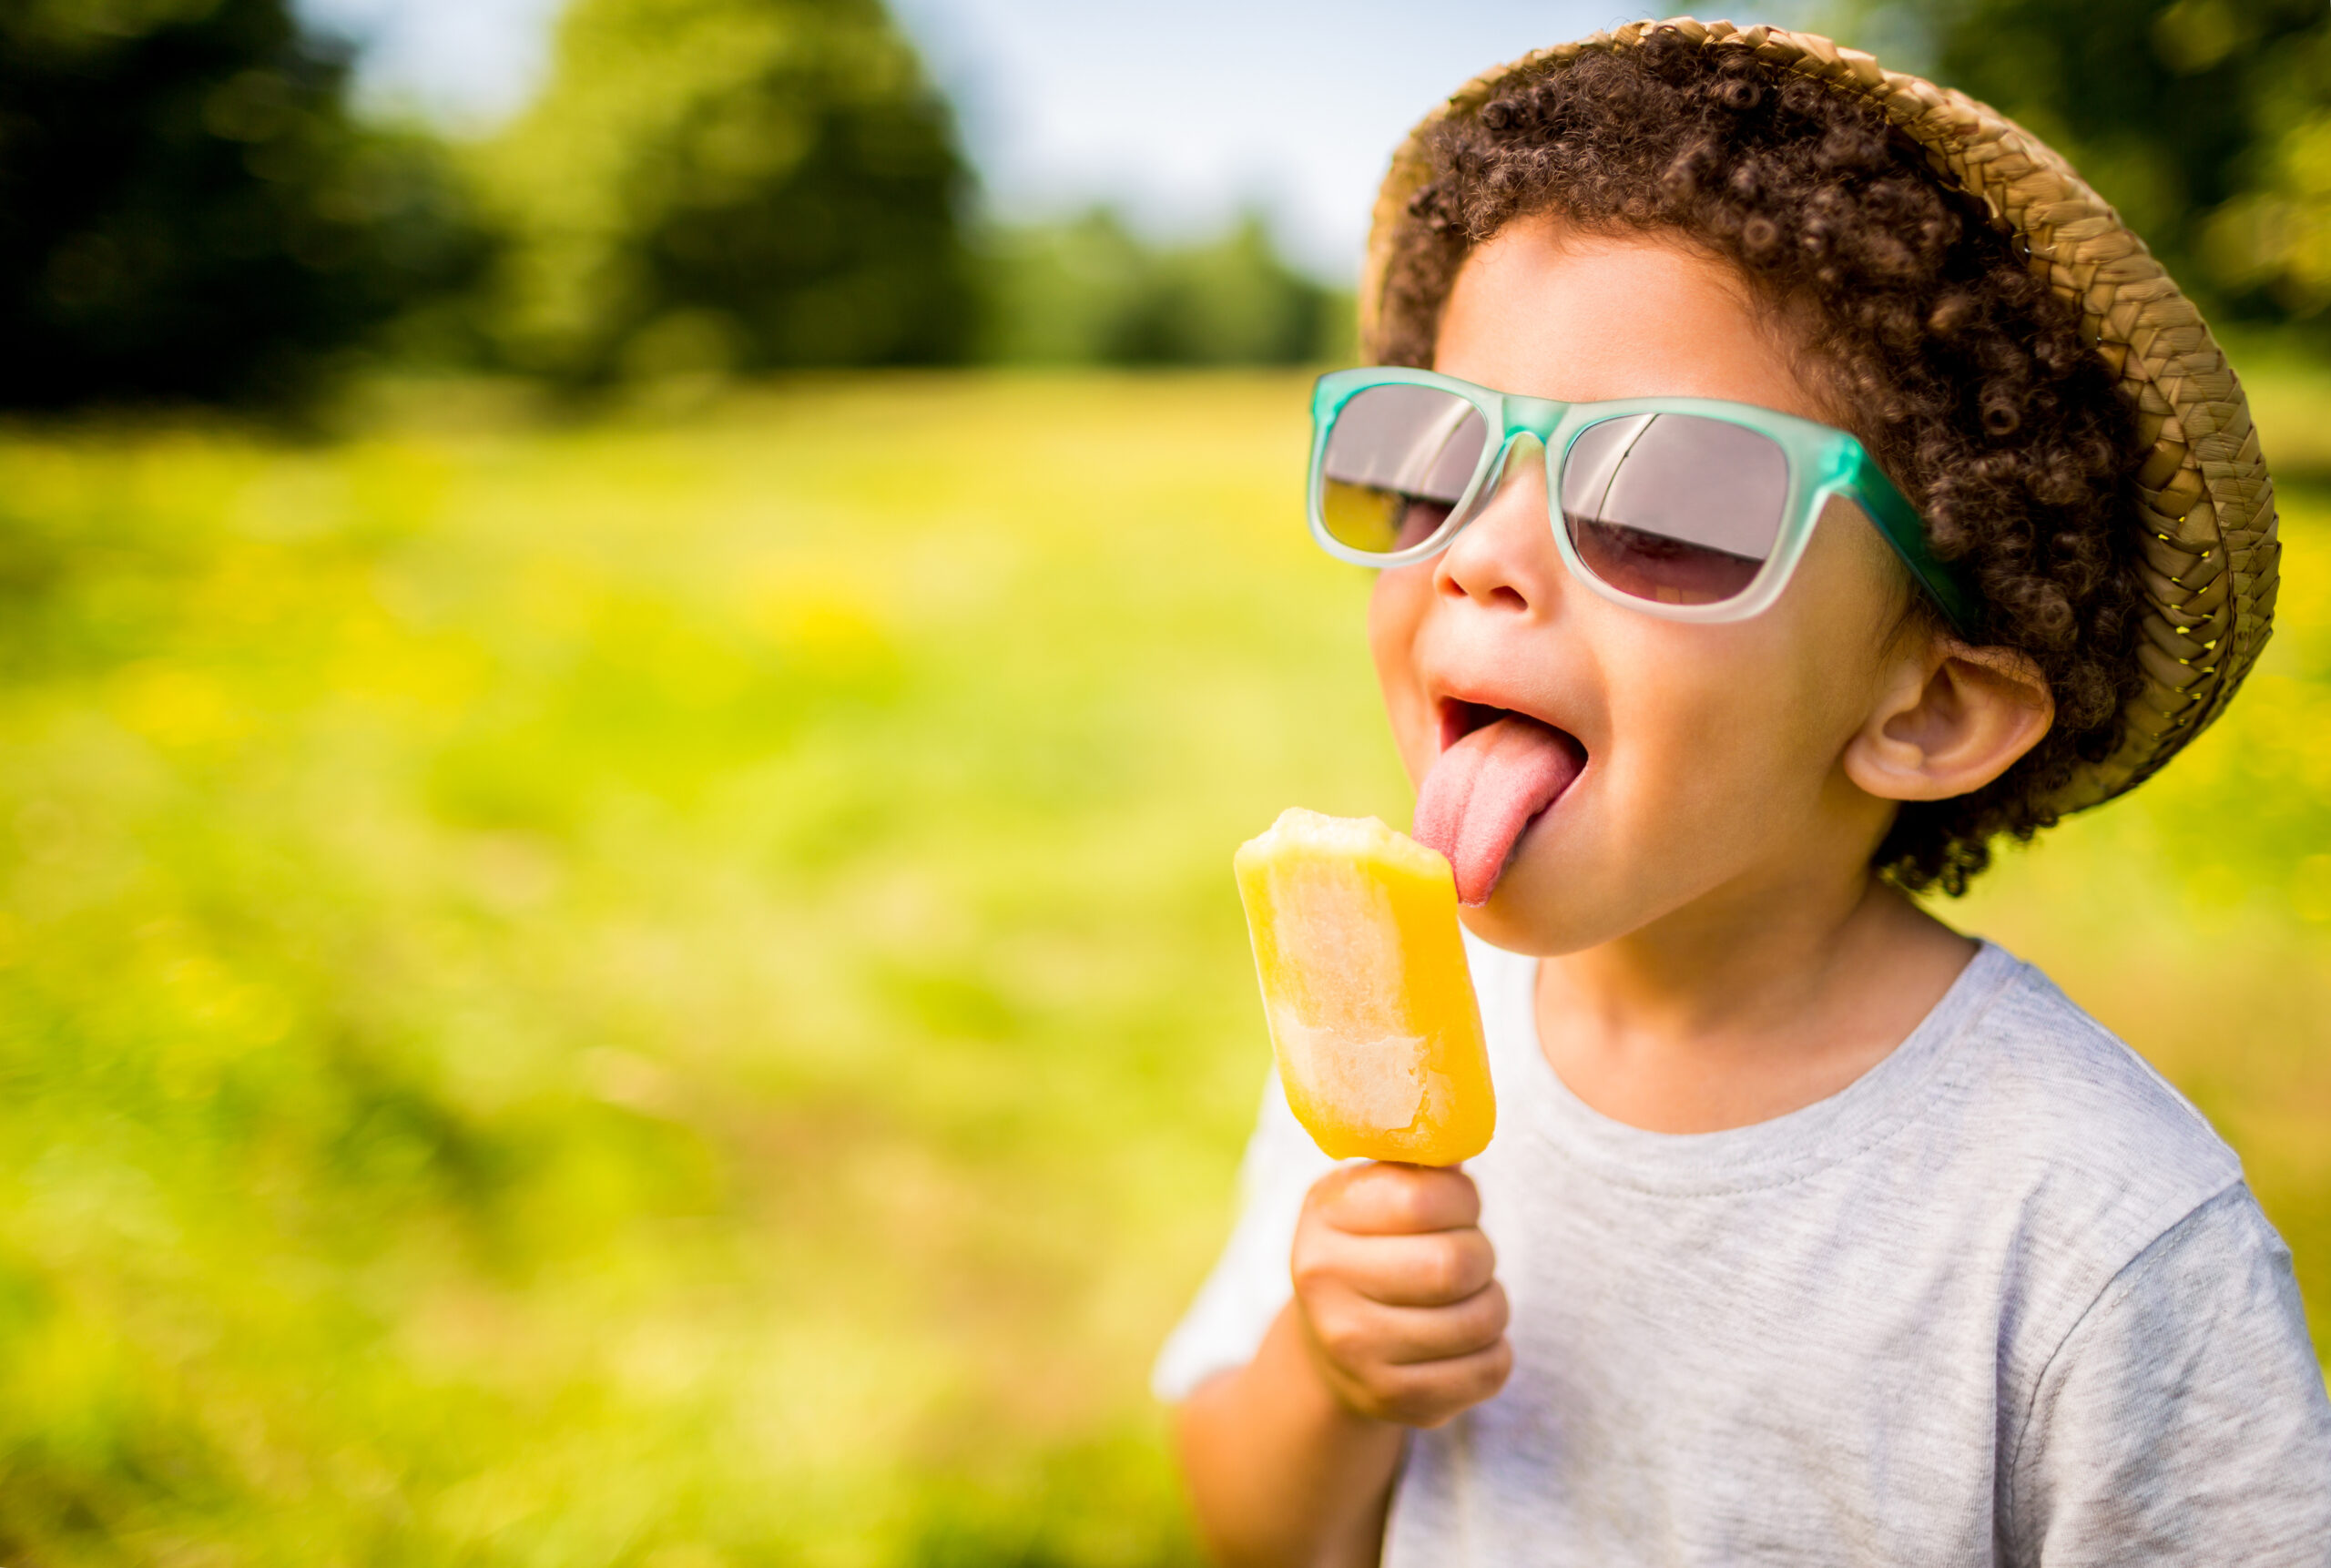 A young boy enjoys an ice block in the summer sun - heat and cool heat pumps will keep you cool this summer